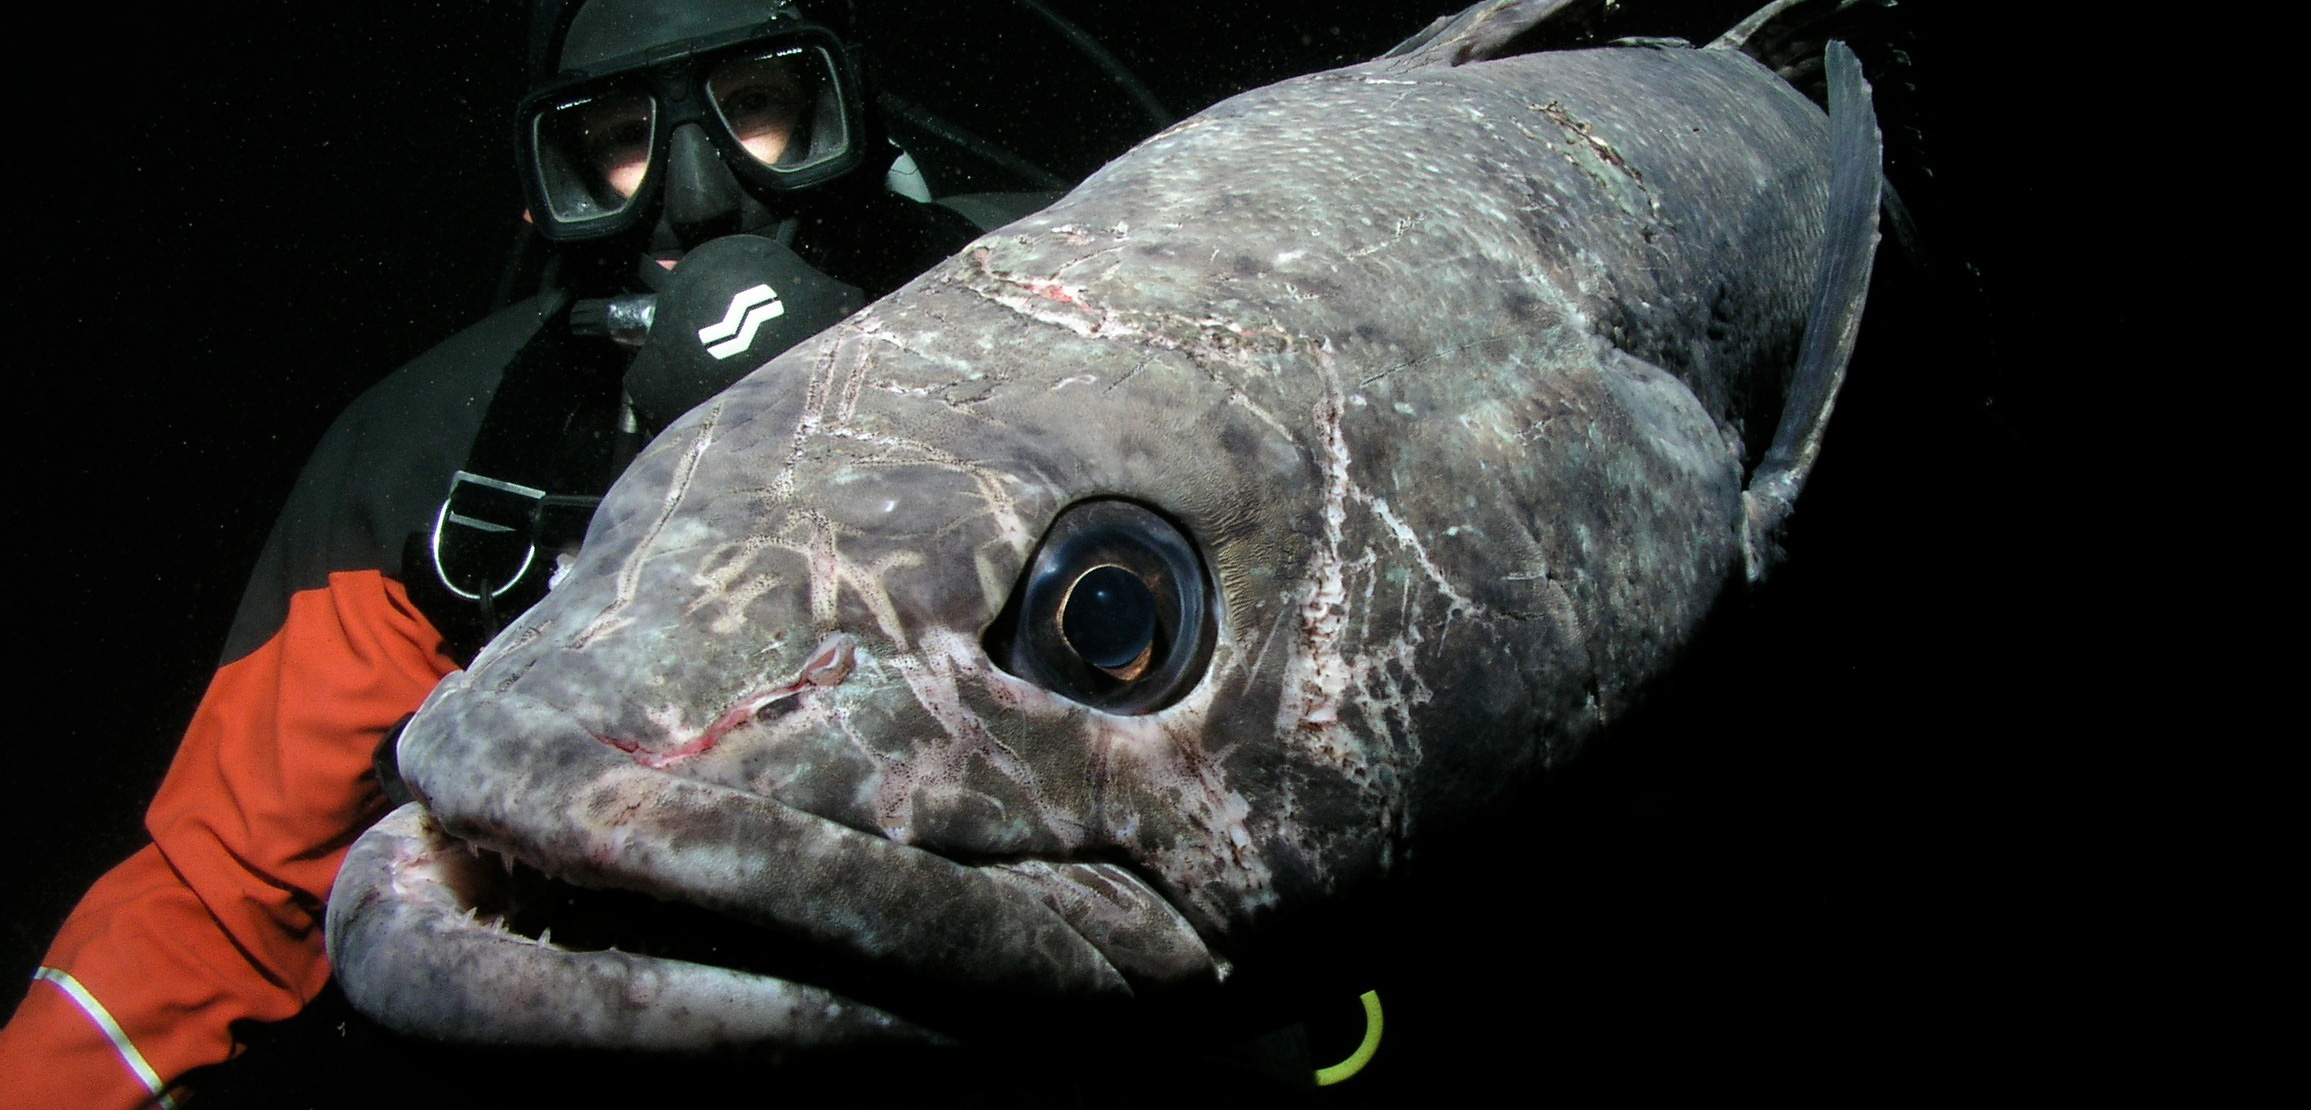 Antarctic toothfish, aka Chilean sea bass, are a prized catch in the Southern Ocean. Until recently, very little was known about their reproduction. Photo by Rob Robbins/USAP